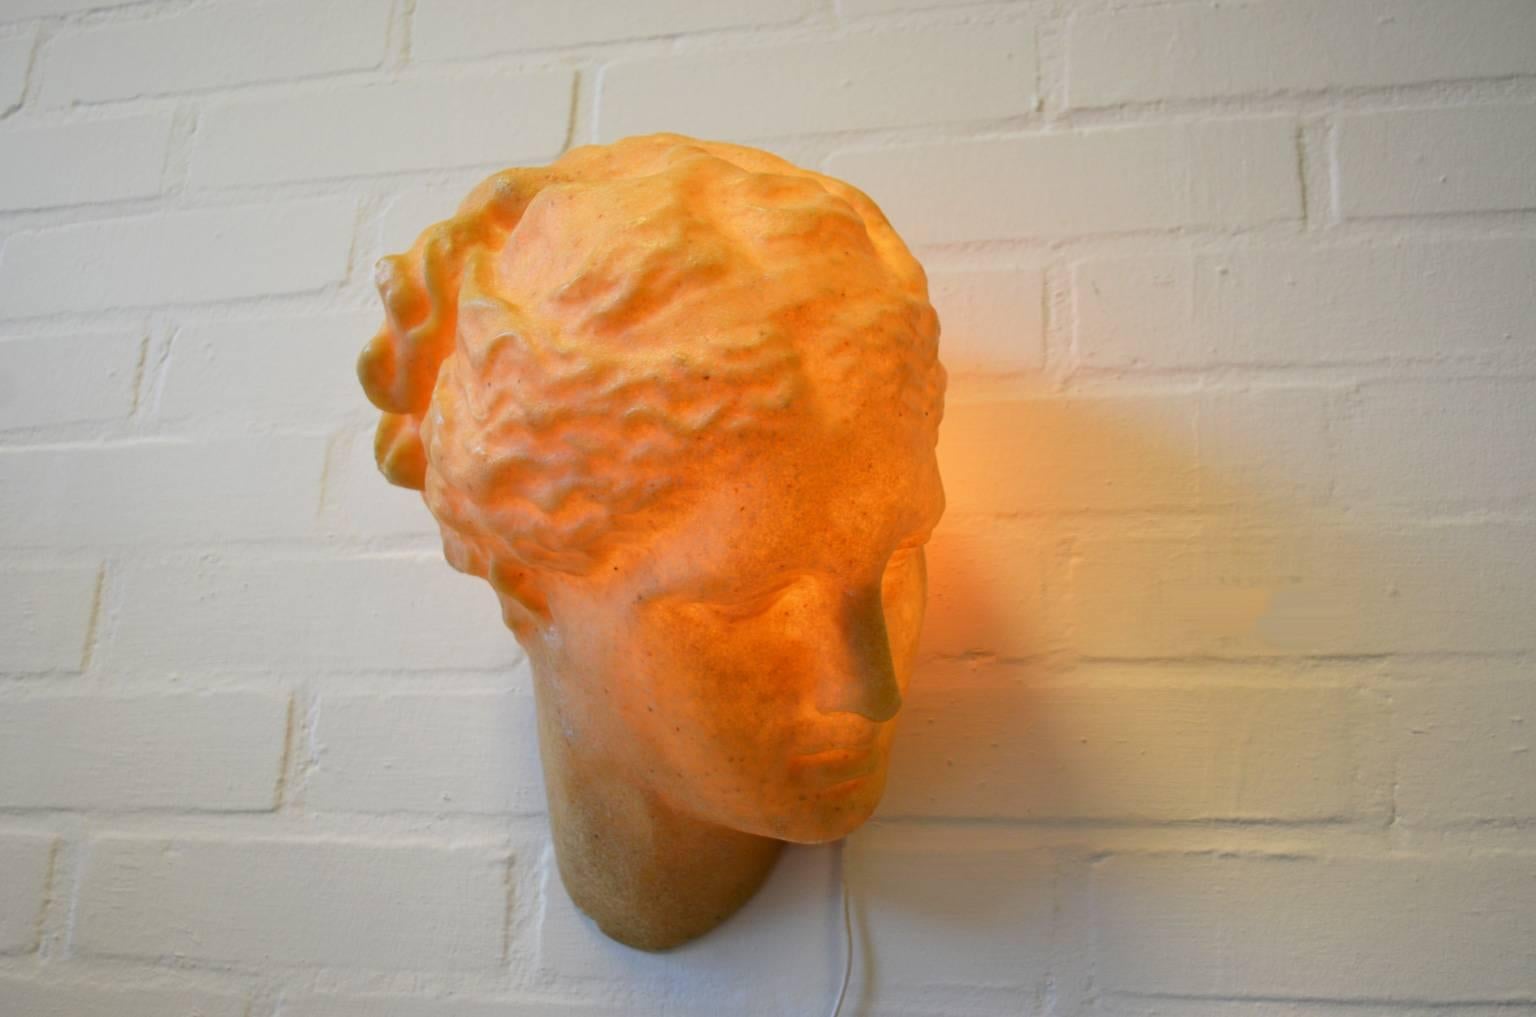 Wall lamp designed by André Cazenave for Atelier A France. The lamp looks like a sculpture depicting the Greek goddess Aphrodite. It is made of polyester and marble powder. The lamp is in a good condition with a small damage to the goddess her neck.